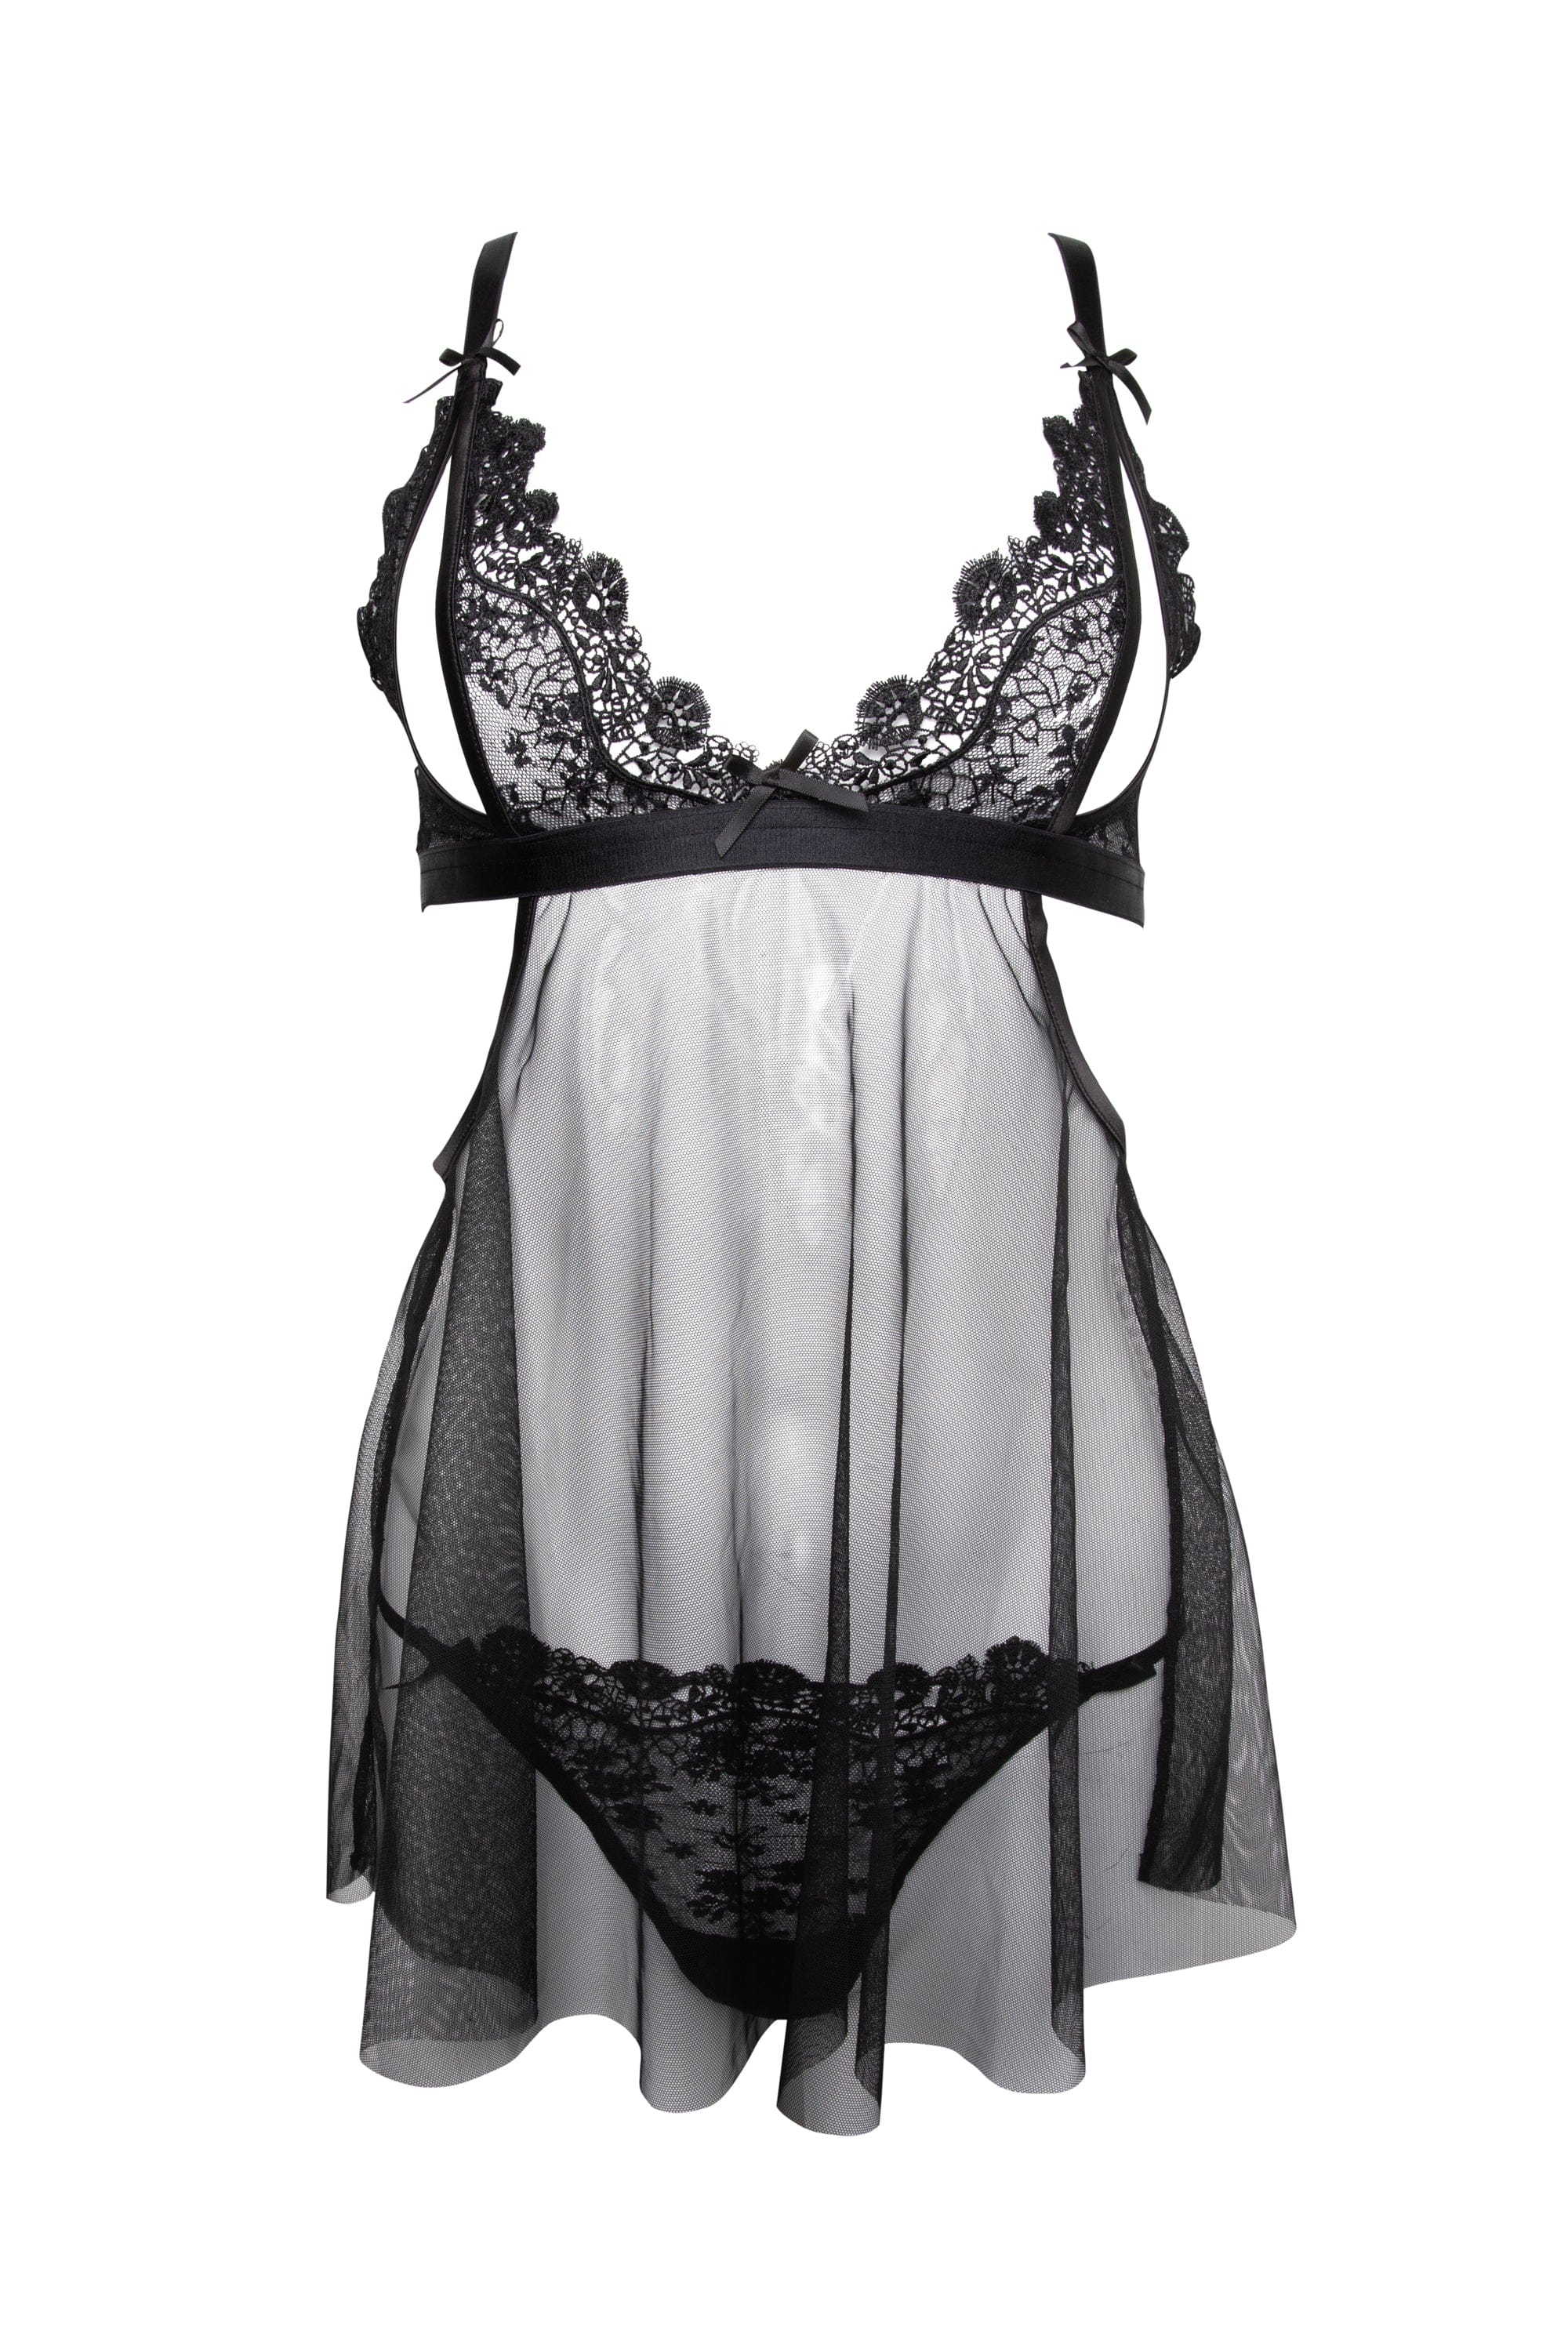 19056- Black Lace High-end Delicate Embroidery Baby Doll Lingerie, plus size  available Set – Western F.a.s.h.i.o.n